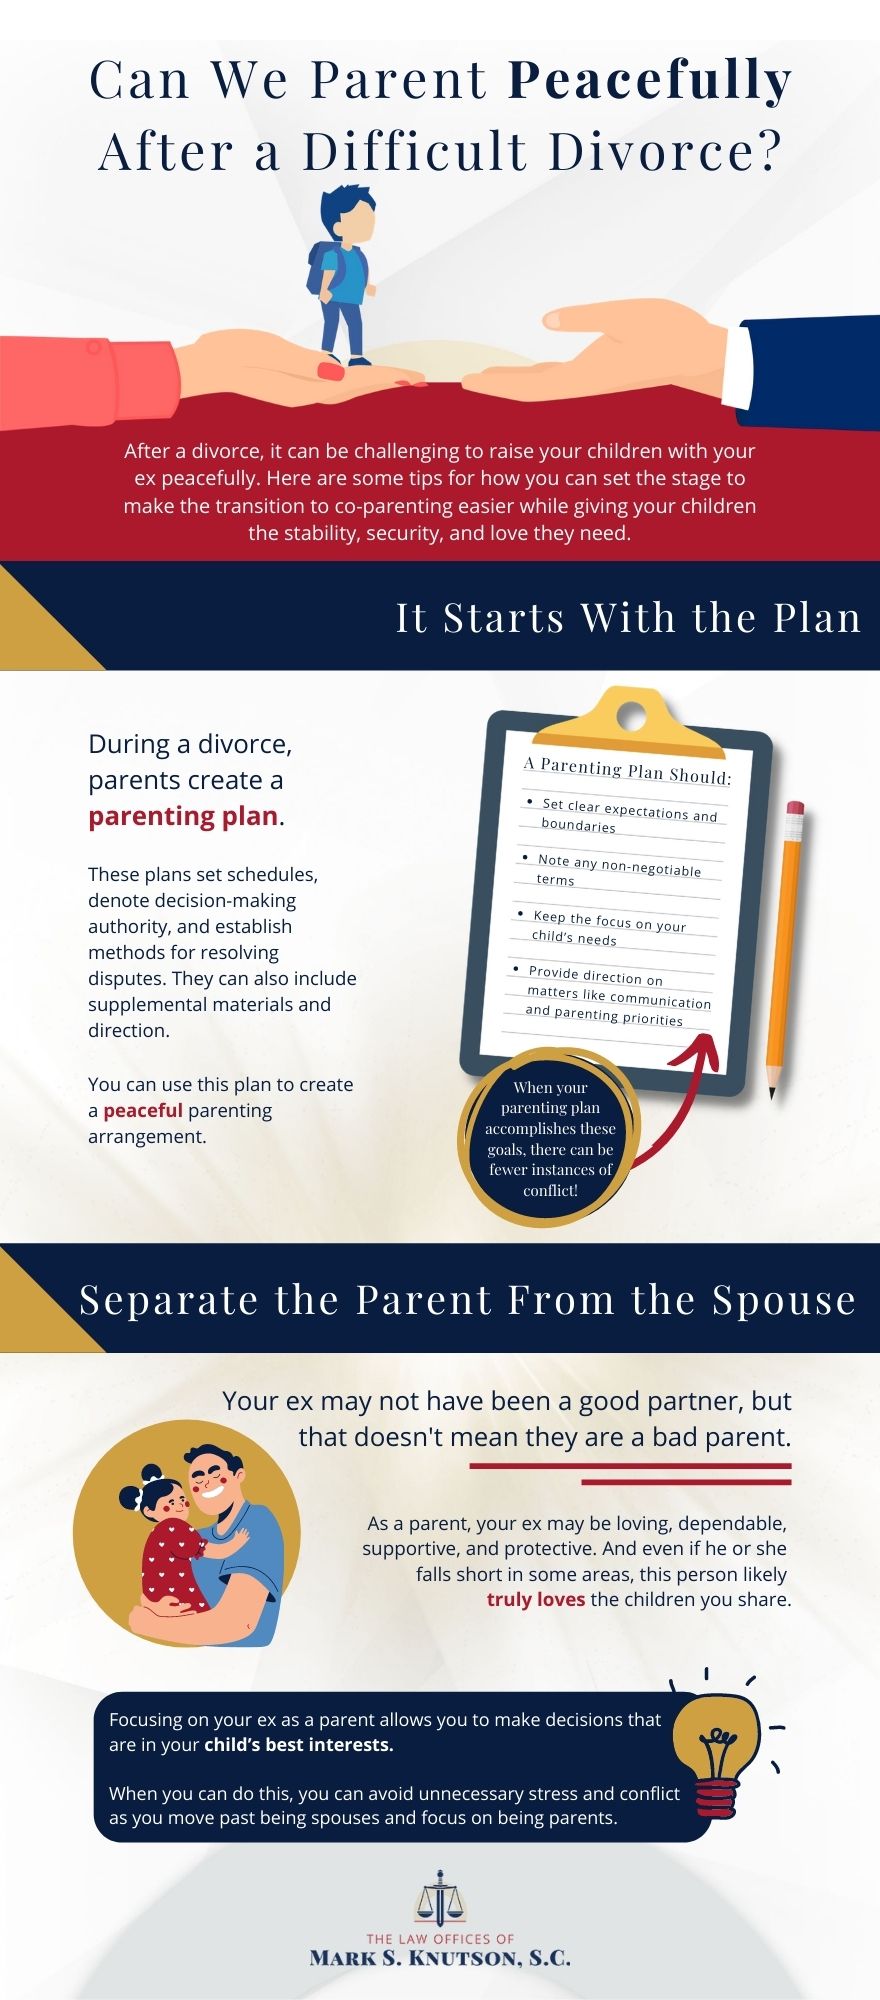 Can We Parent Peacefully After a Difficult Divorce (Infographic)